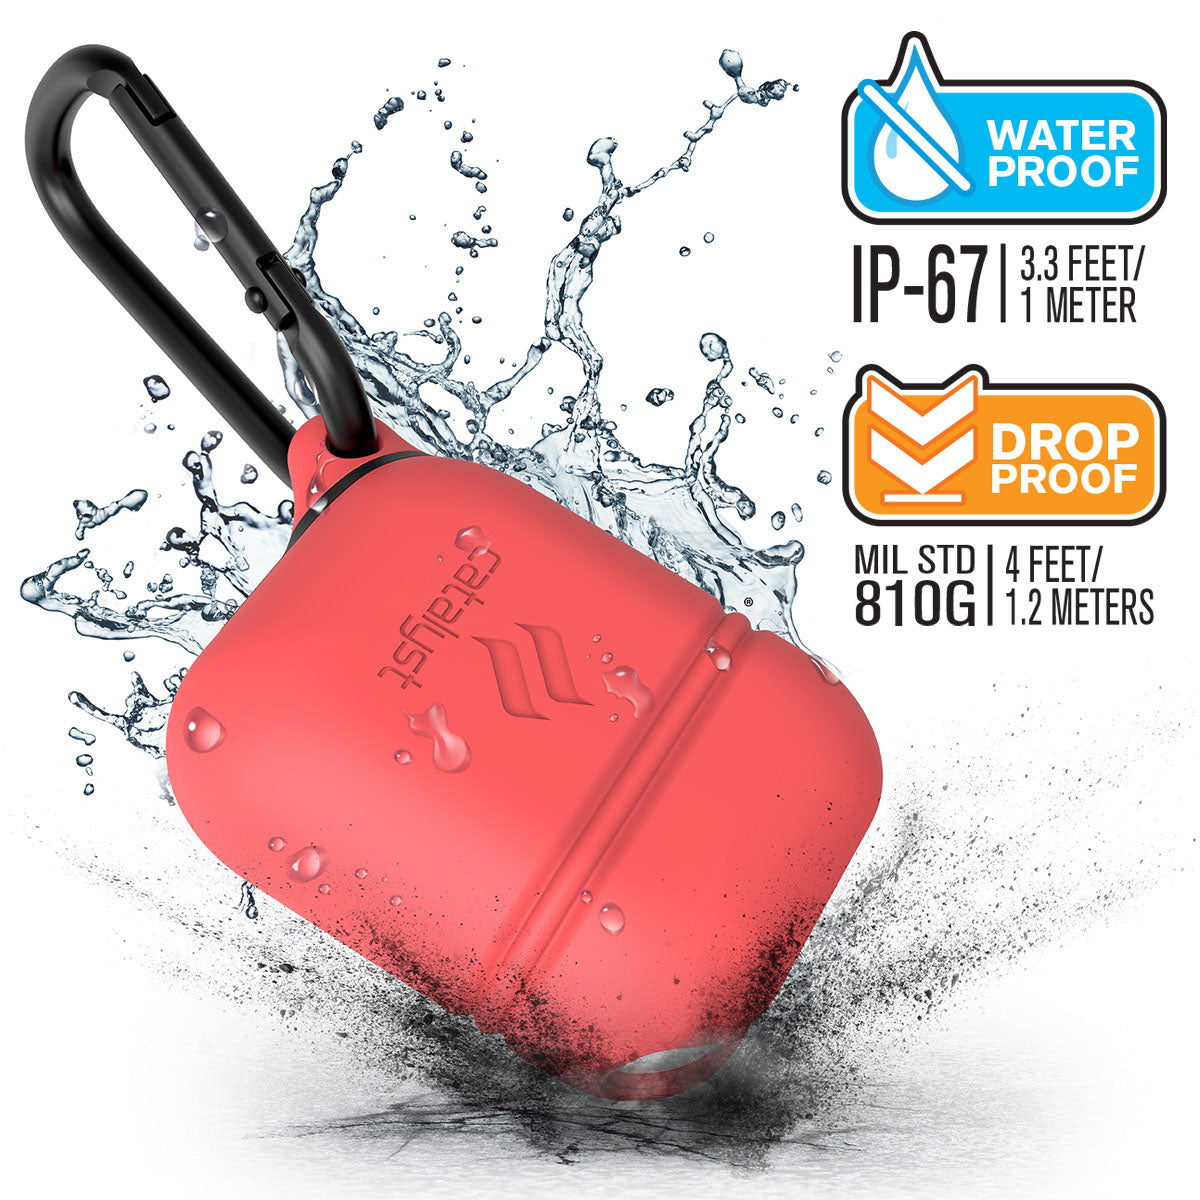 Catalyst airpods gen2/1 waterproof case + carabiner showing the case drop proof and water proof features with attached carabiner in coral text reads water proof IP-67 3.3 FEET/1 METER DROP PROOF MIL STD 810G 1.2 METERS